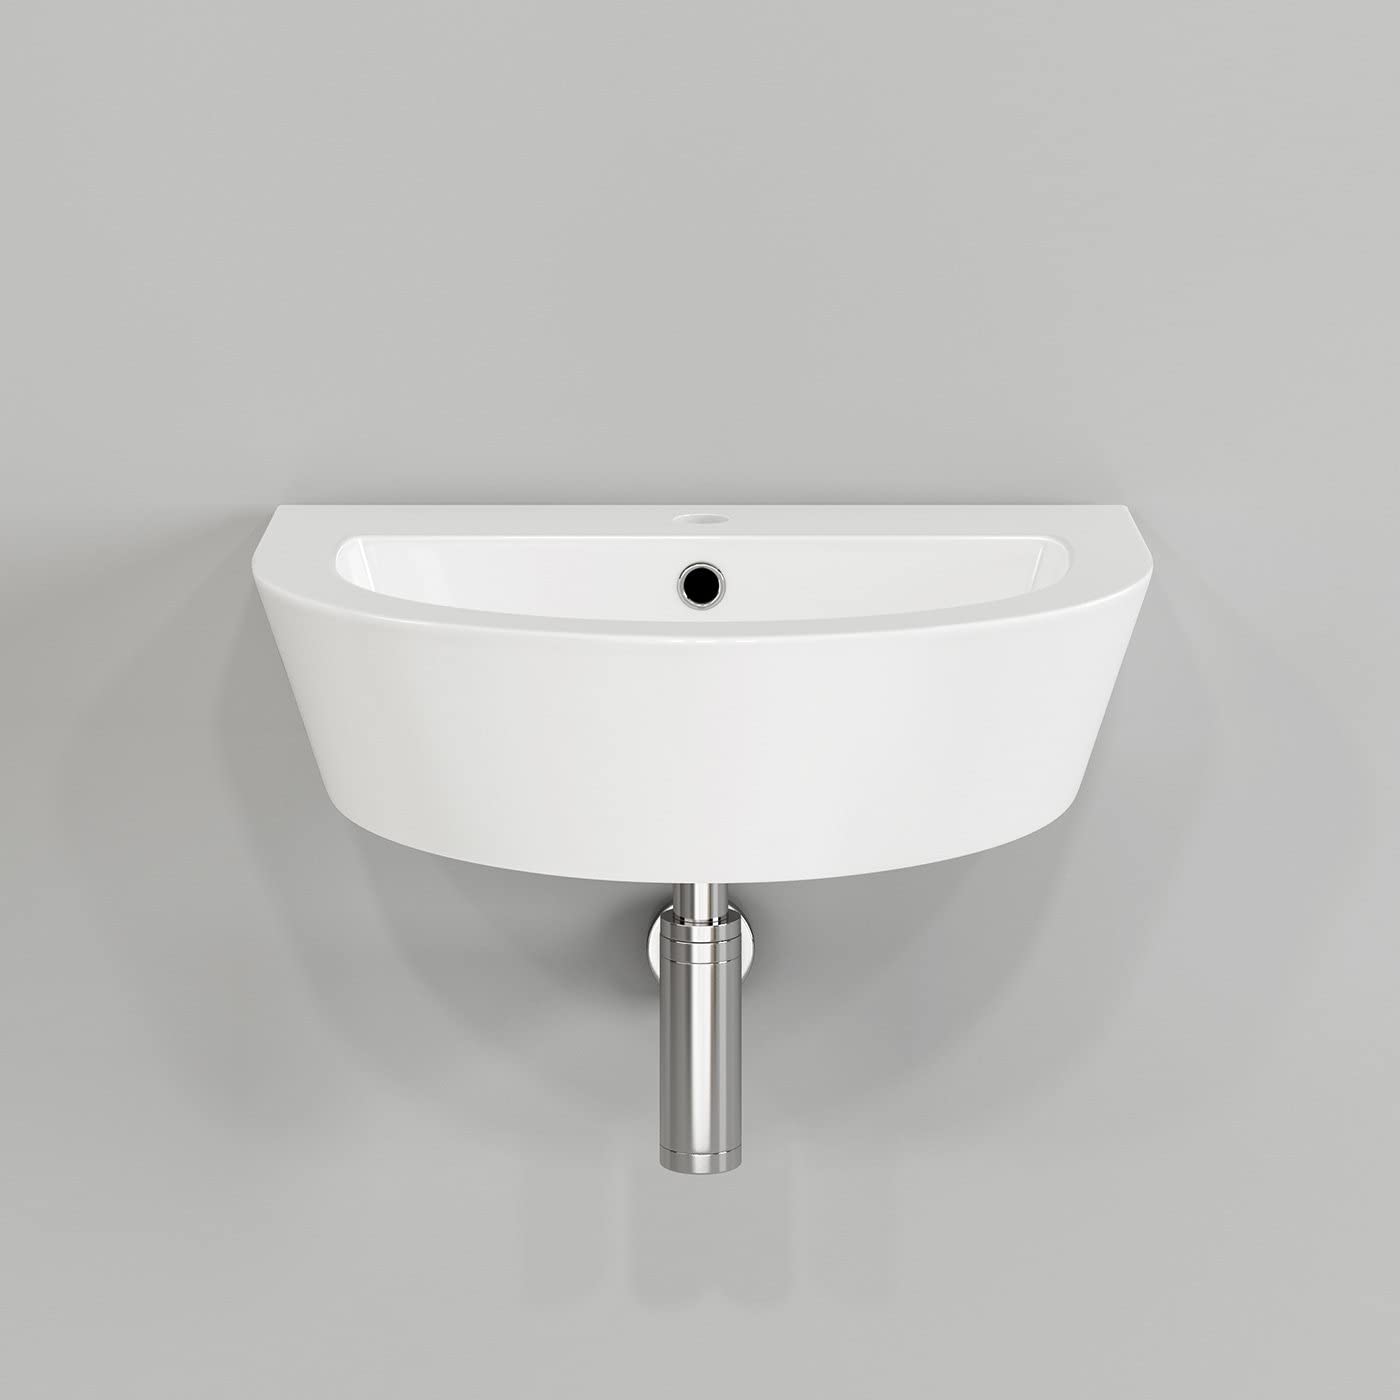 Modern Curved Ceramic Wall Hung Cloakroom Basin - 445mm x 330mm - Gloss White